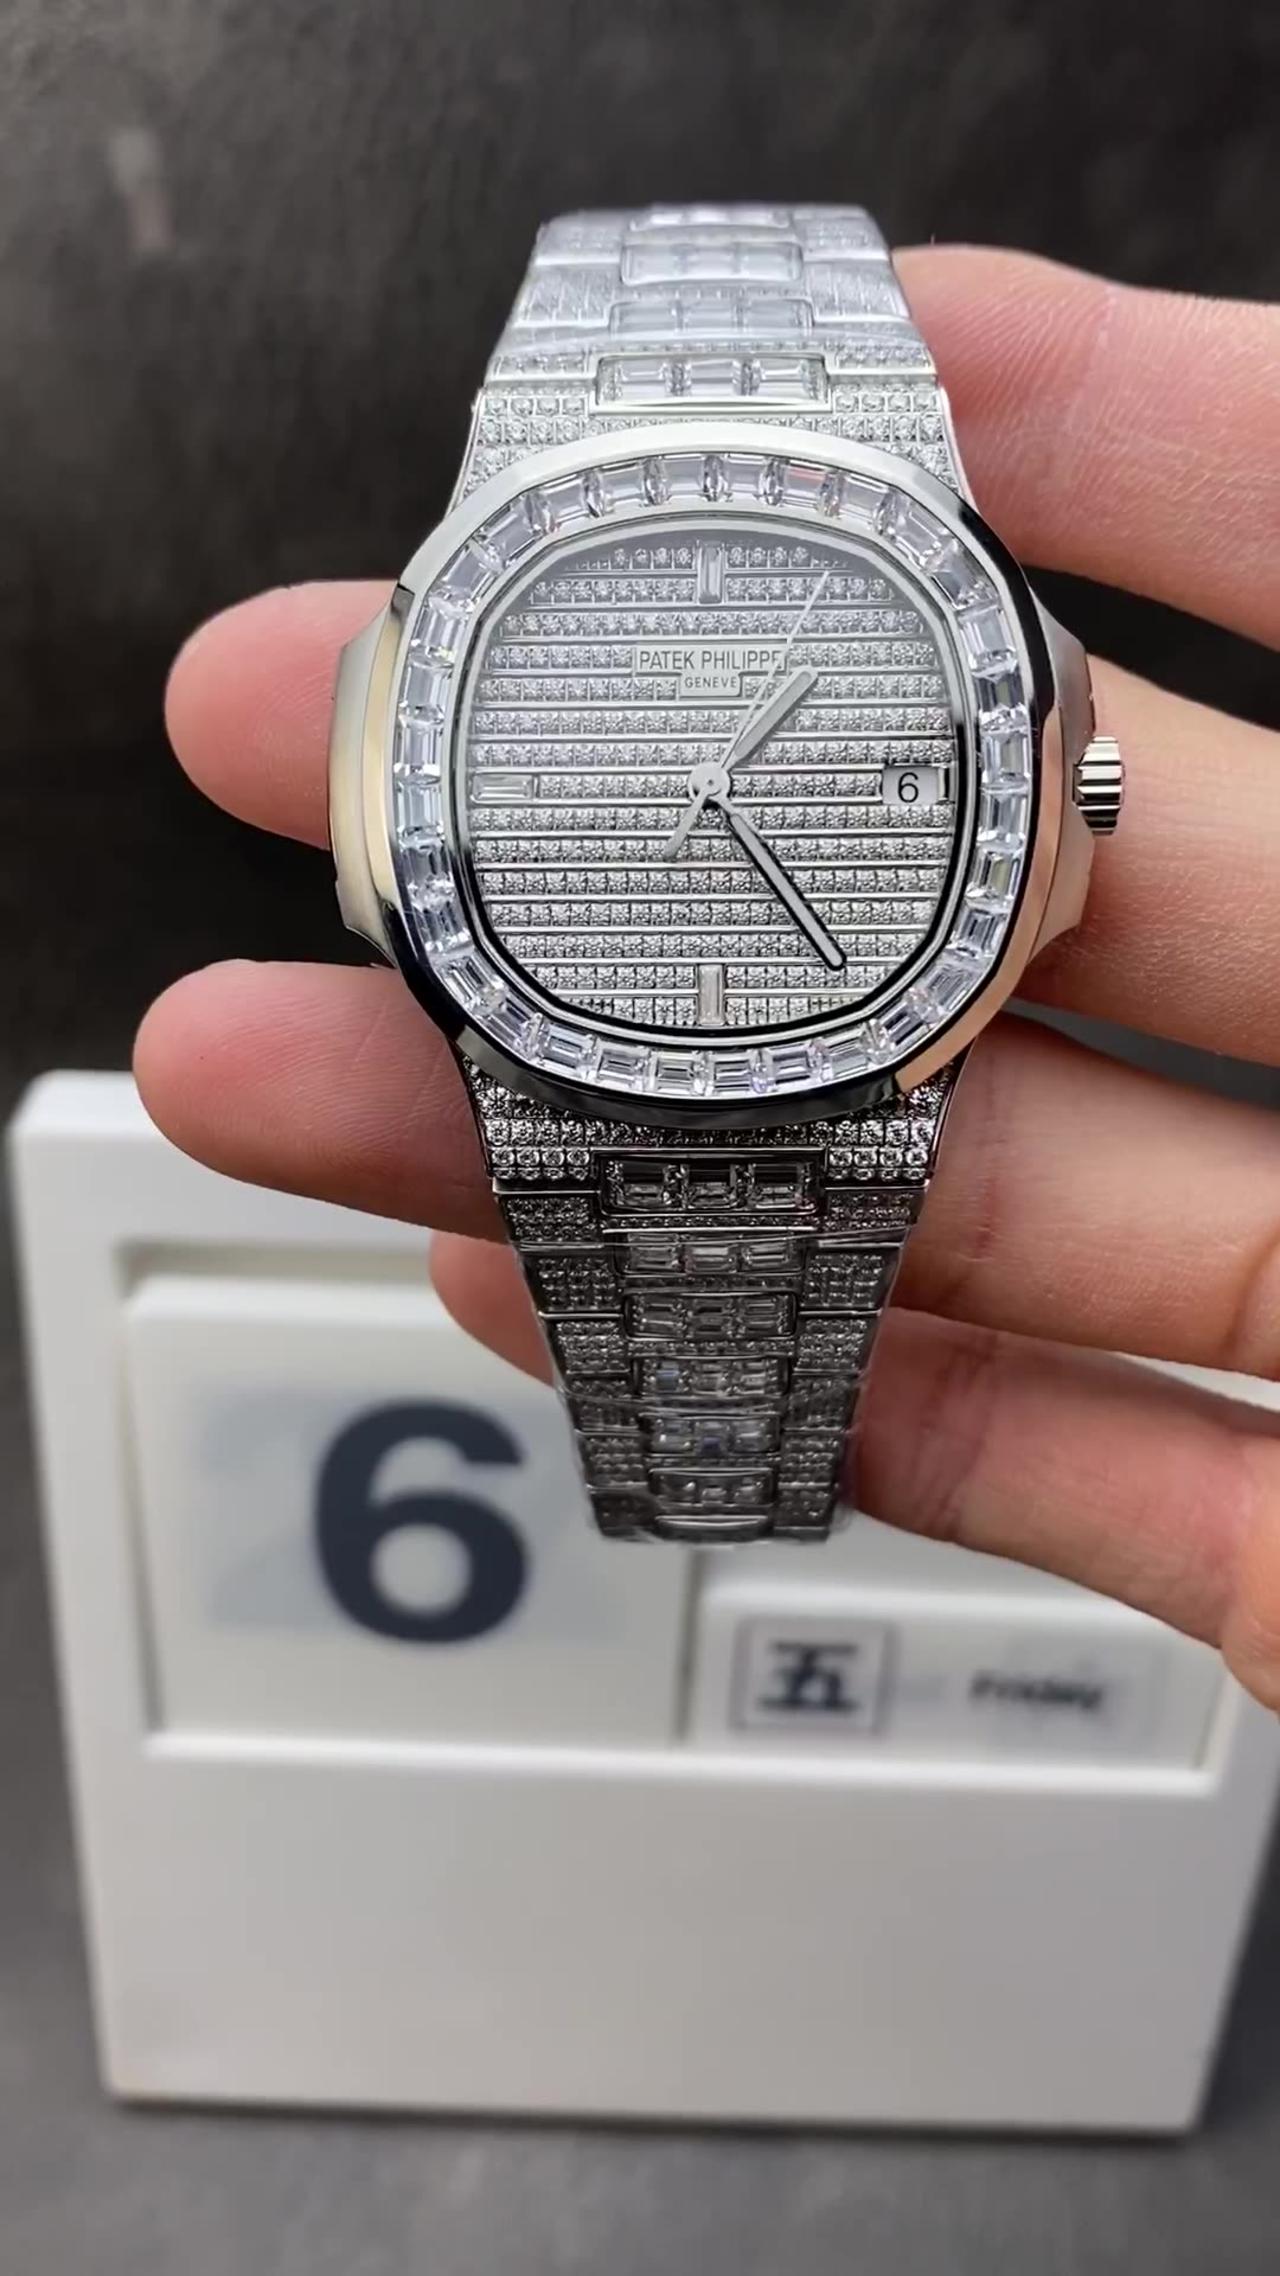 Patek Philippe Nautilus Iced Out - One News Page VIDEO